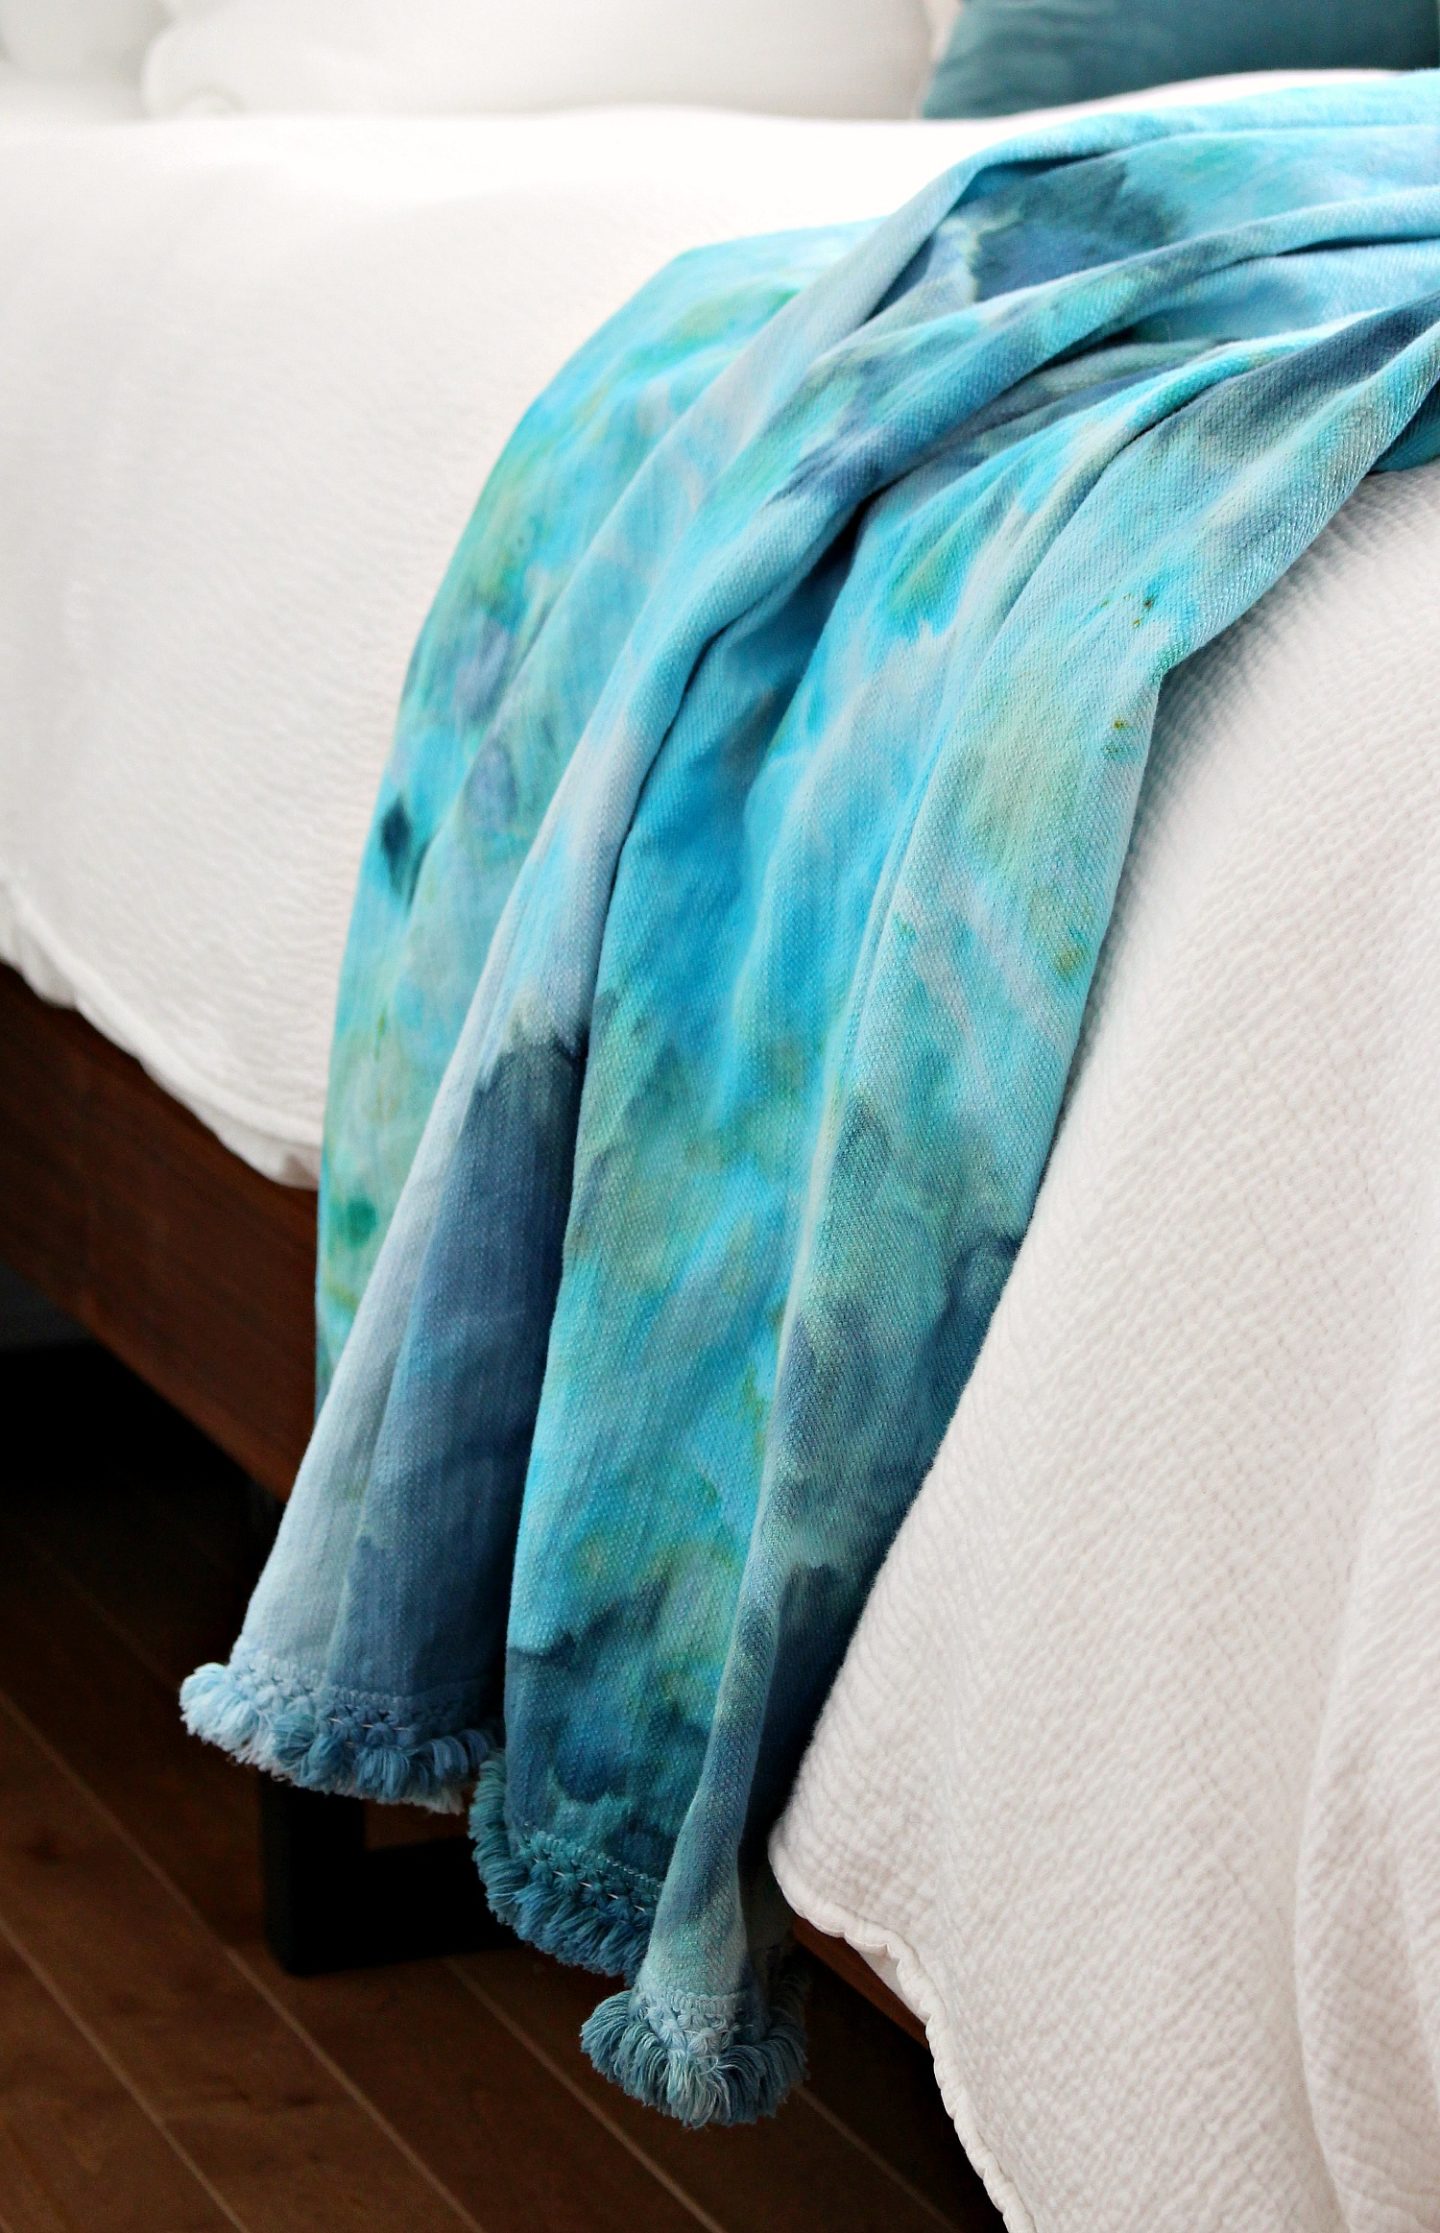 Procion Parakeet and Procion Teal Dyes Used for DIY Ice Dye Project | Learn How to Ice Dye - it's an Easy DIY Dyeing Project